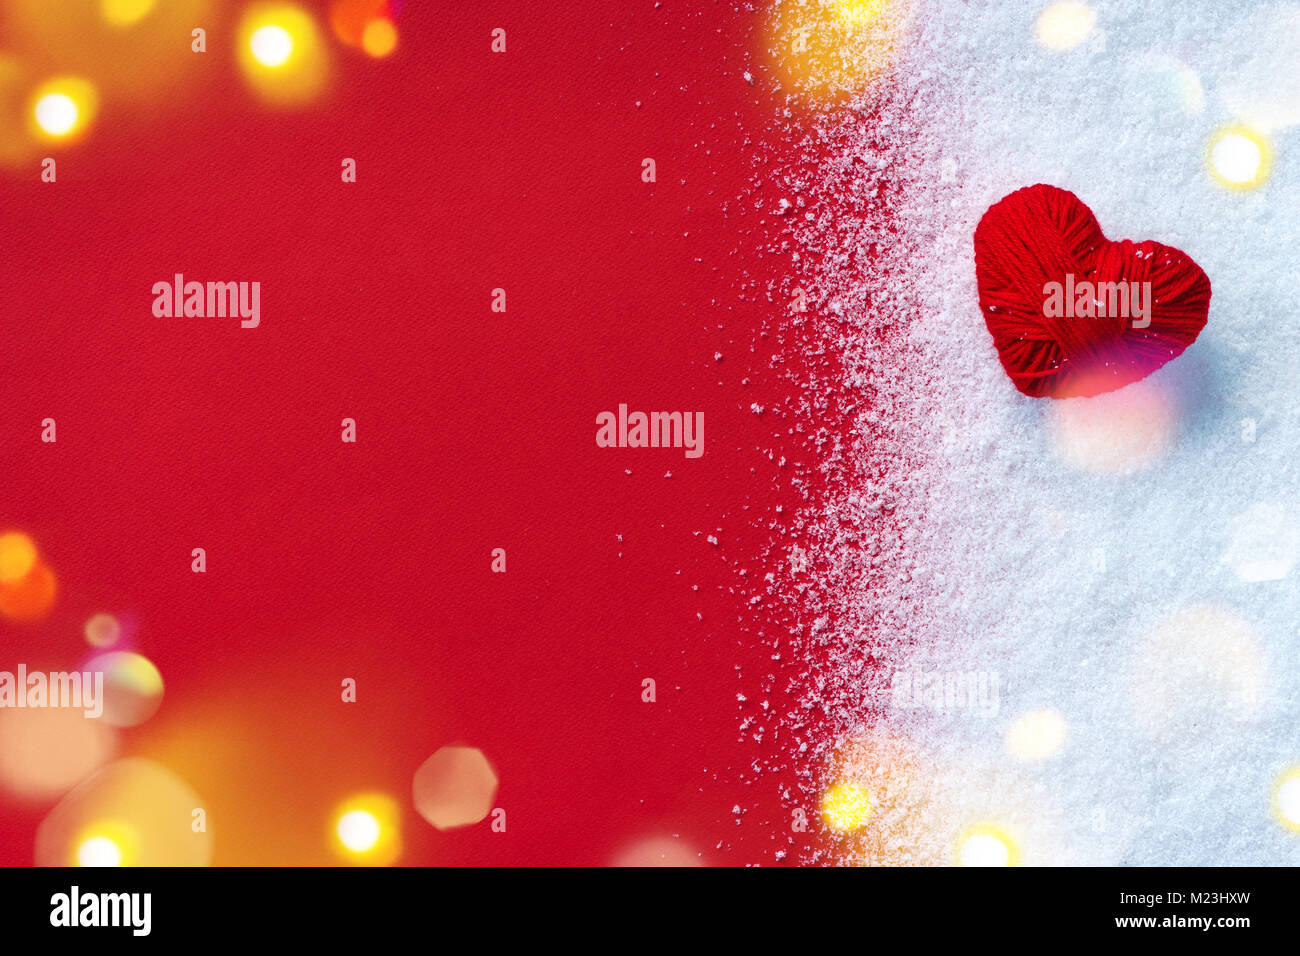 Red heart of wool yarn on snow and red background. Love and St. Valentines Day concept Stock Photo